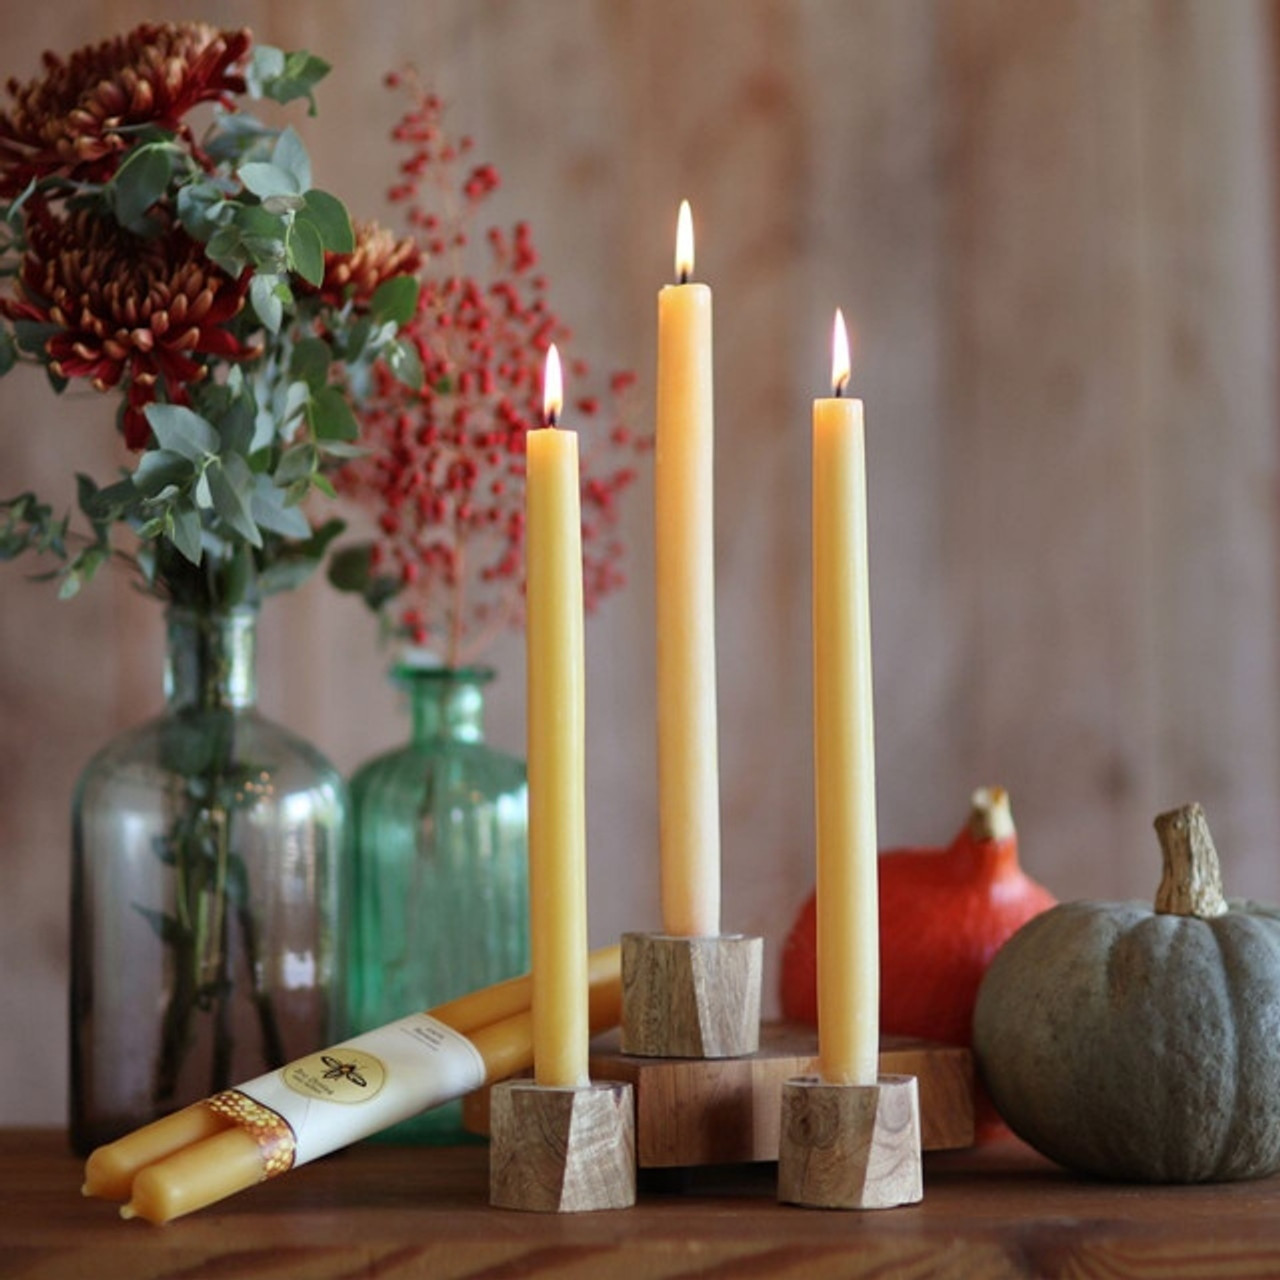 Beeswax Taper Candles - A Child's Dream